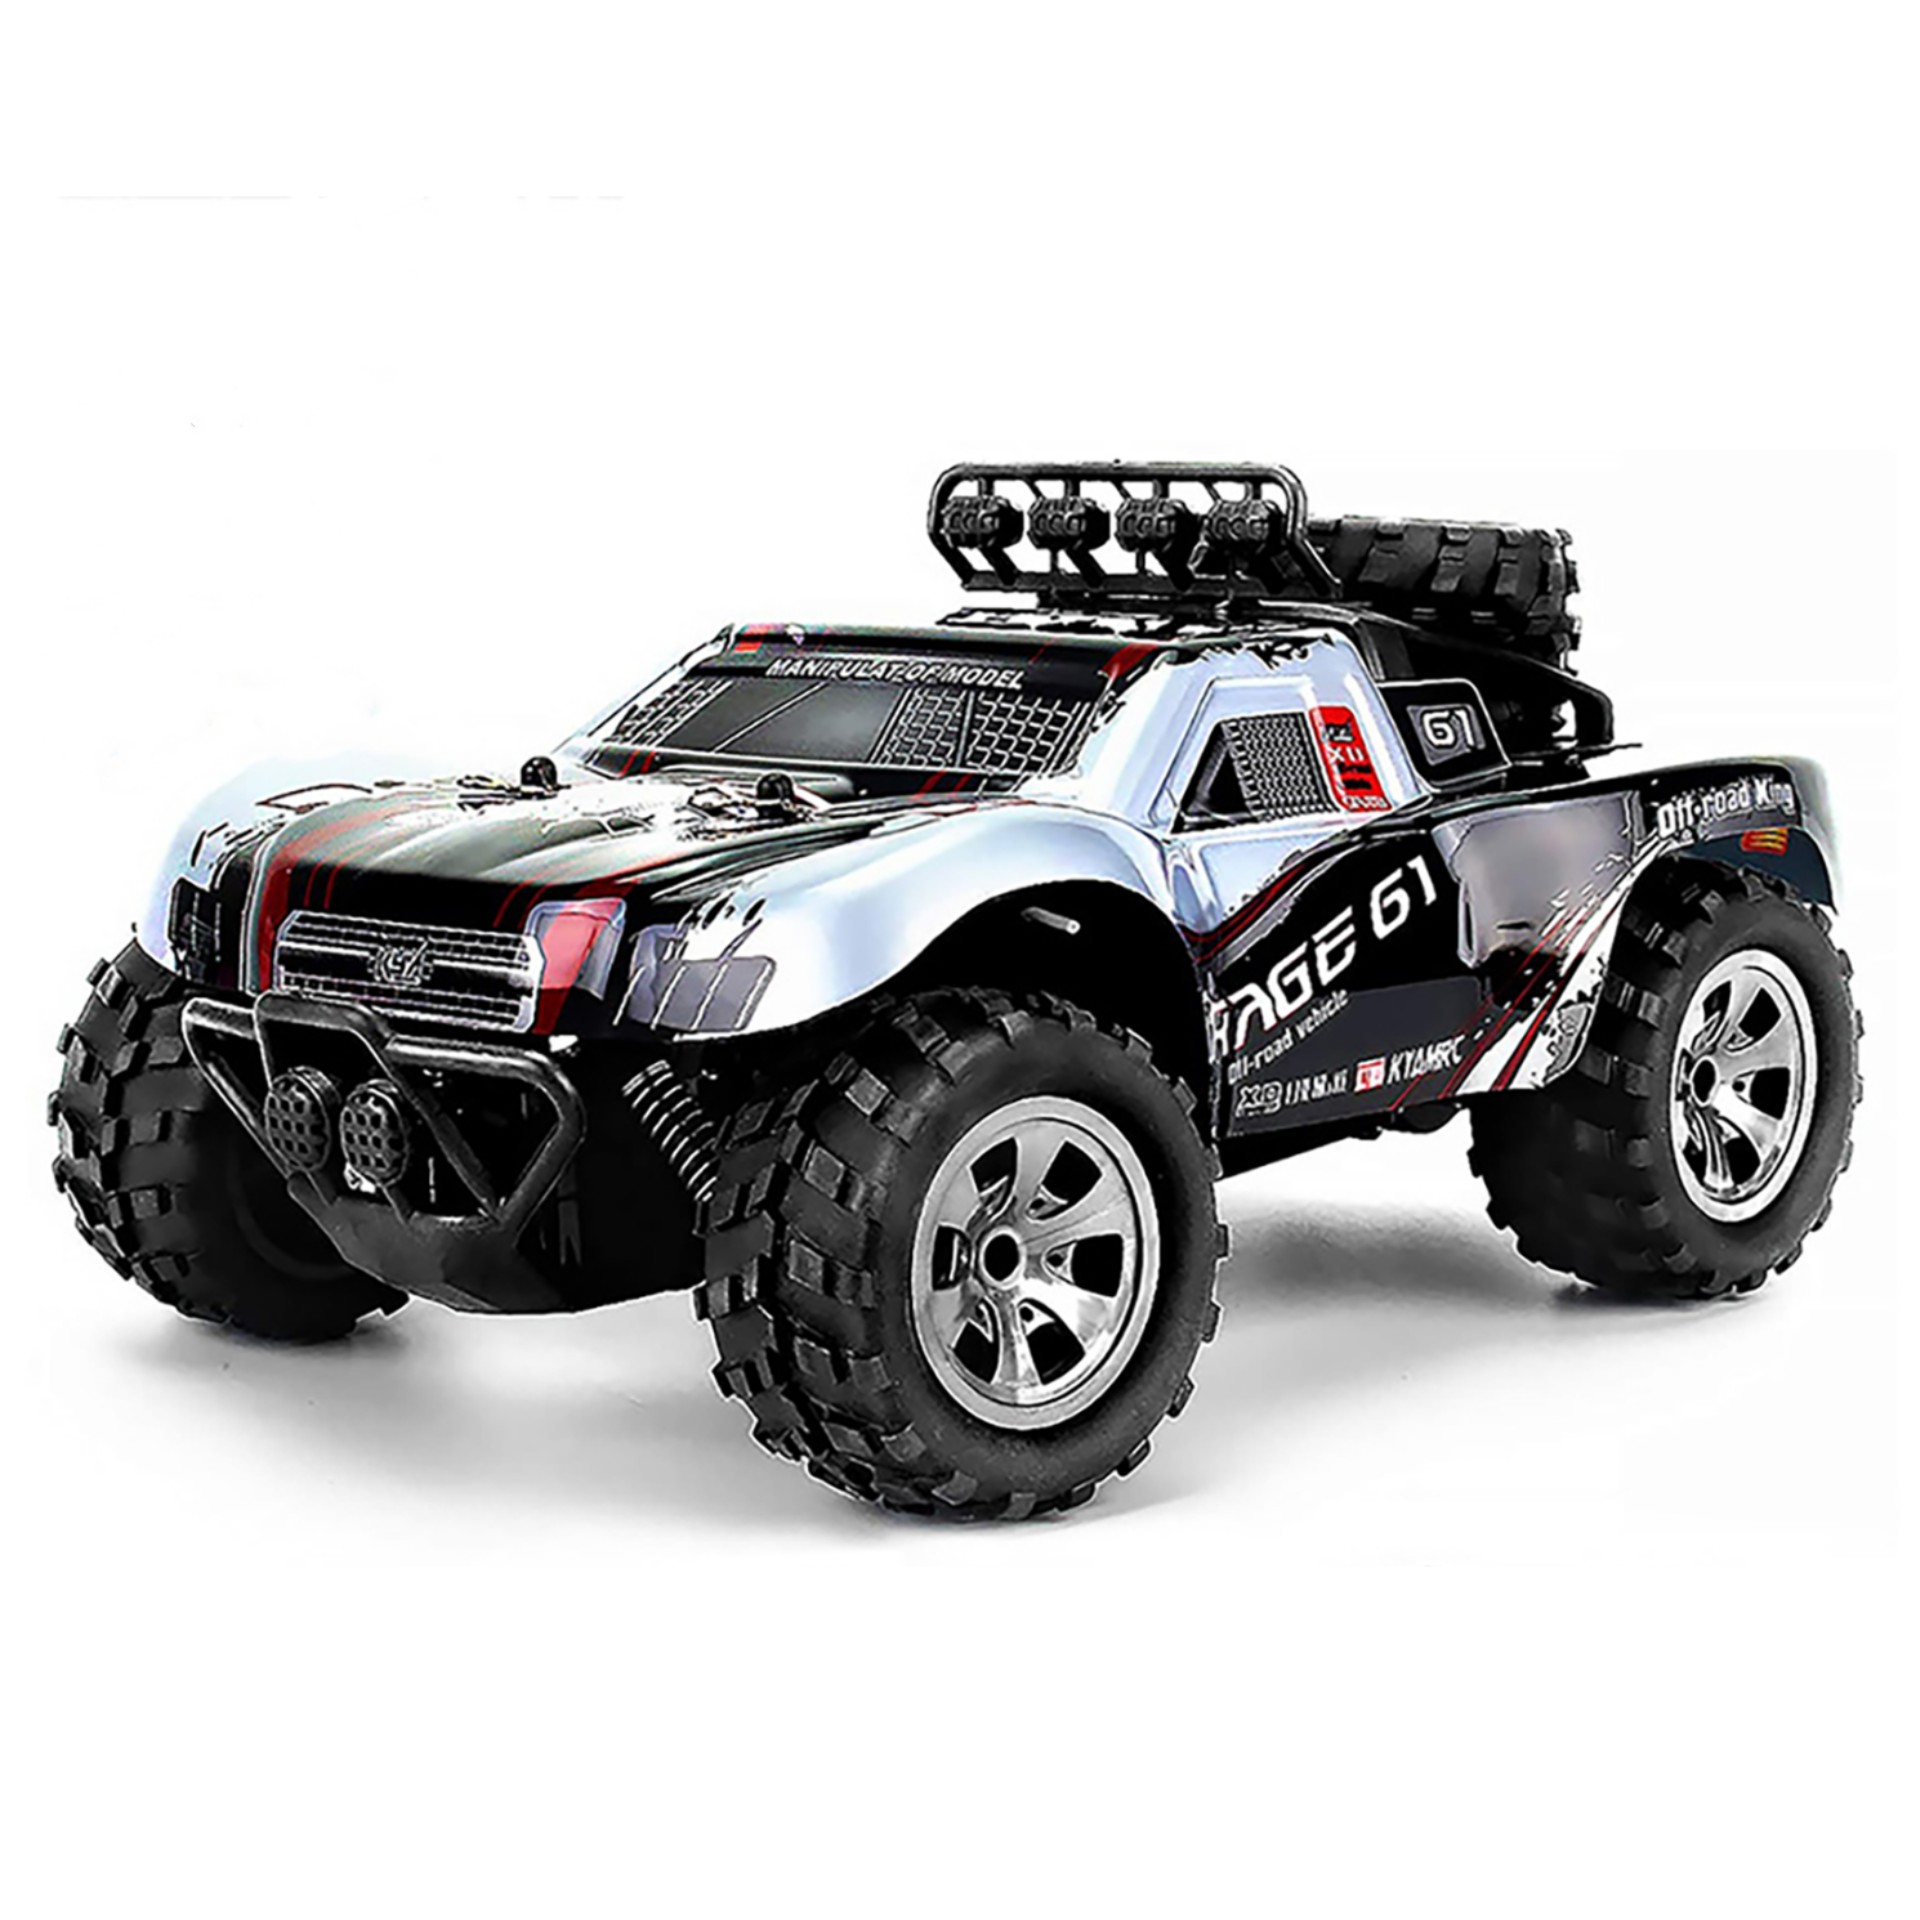 KYAMRC 1:18 RC Car 2.4g High-Speed Off-Road Remote Control Vehicle Racing Climbing Car Model Toys